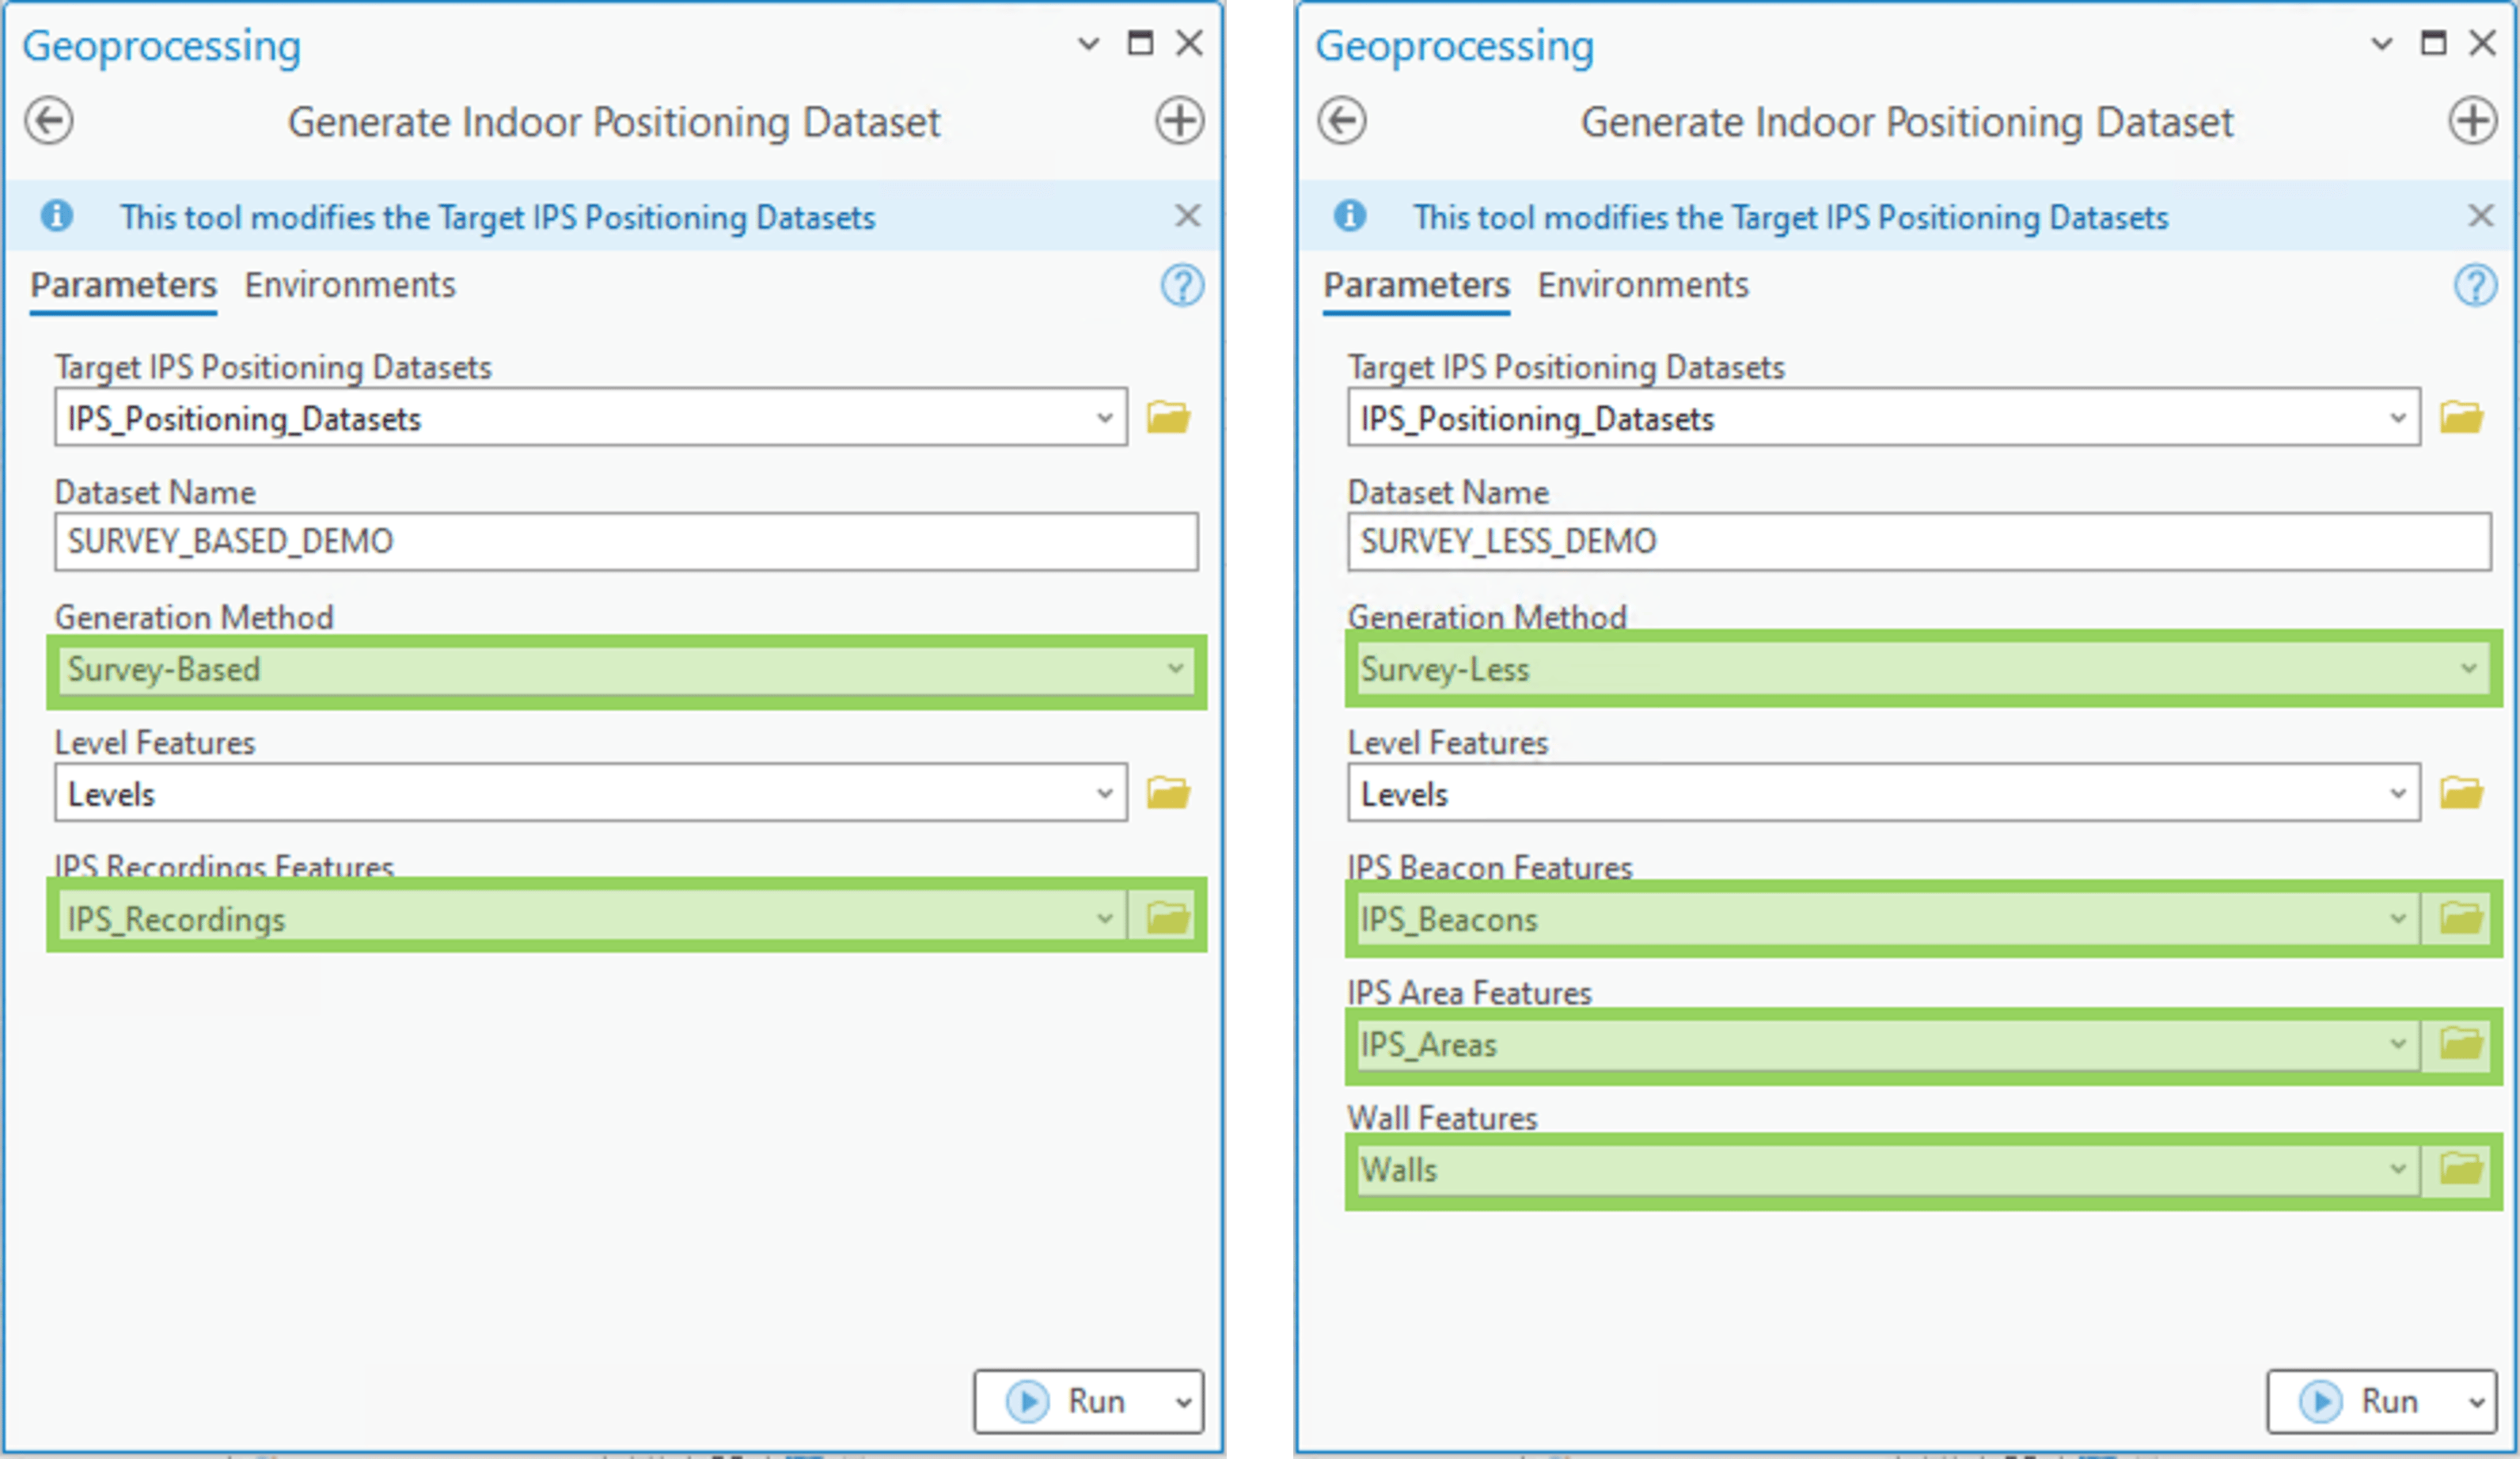 screenshot of ArcGIS Pro geoprocessing tool options to create an indoor positioning dataset